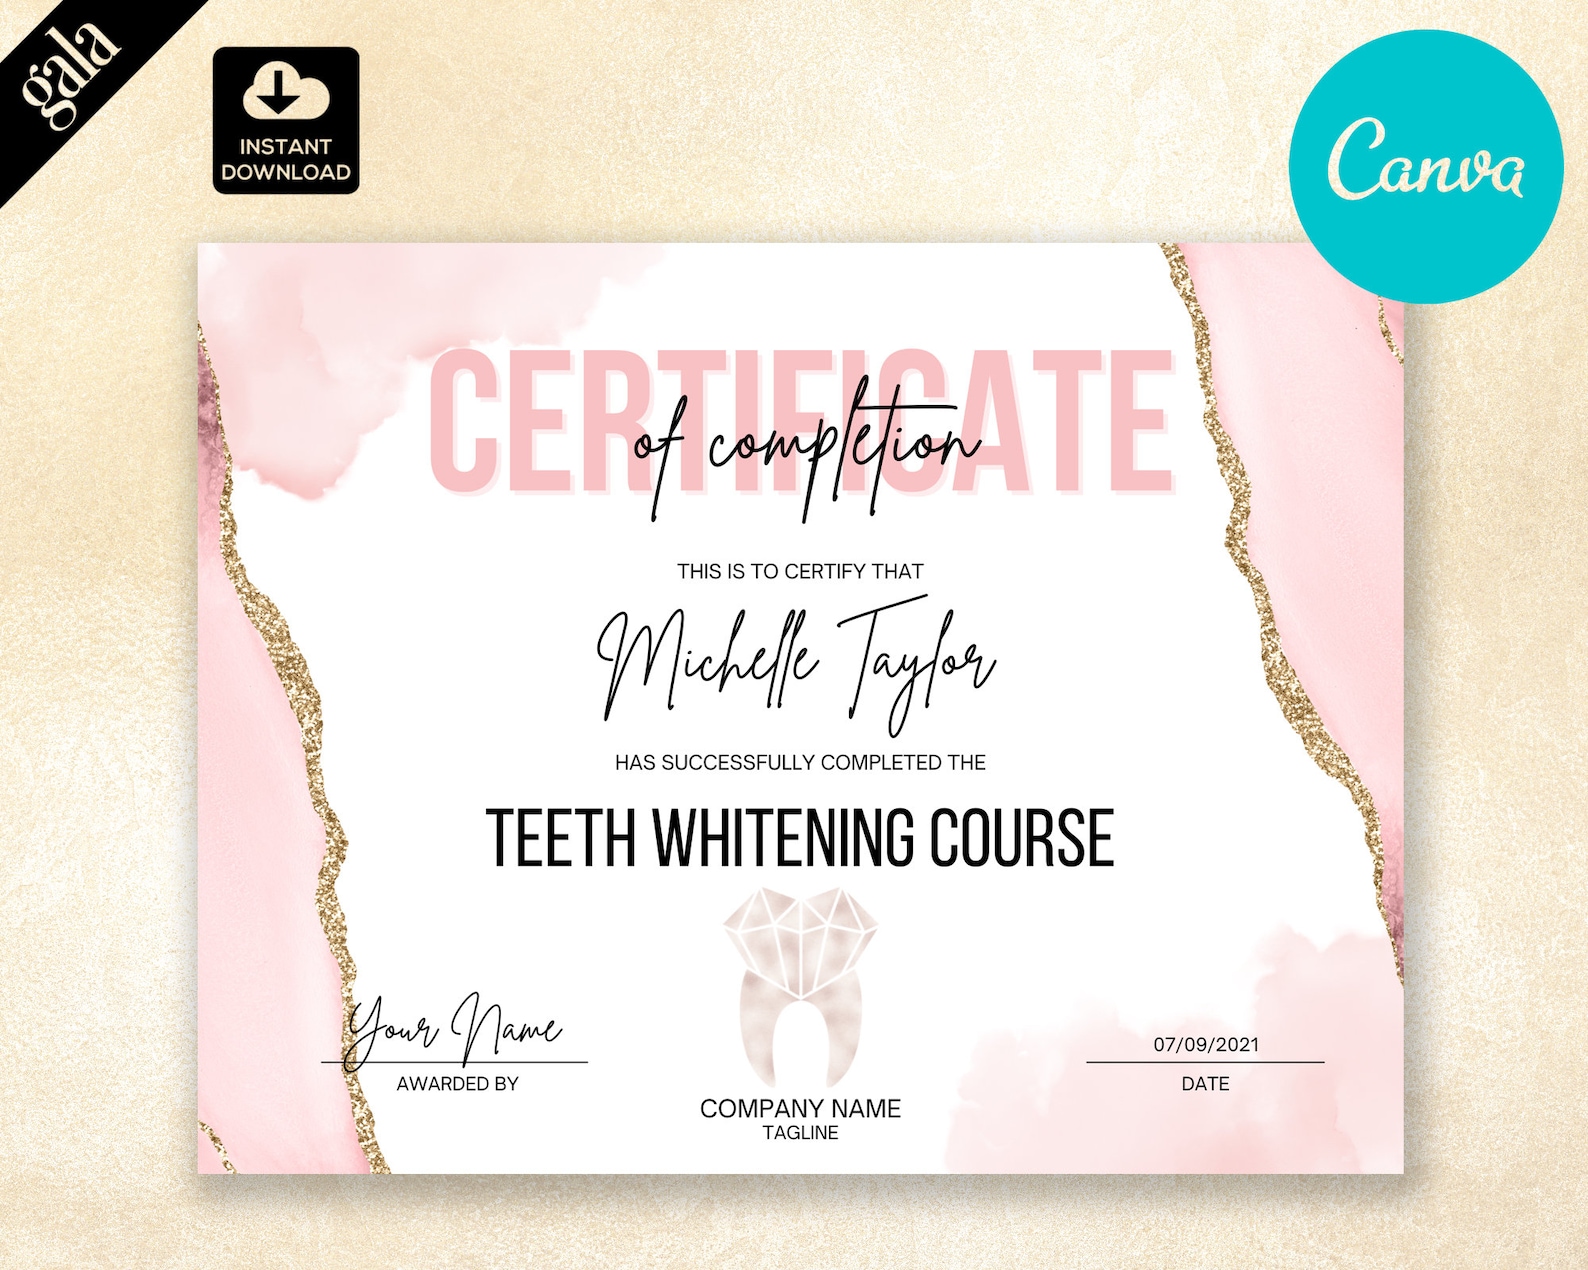 teeth-whitening-certificate-of-completion-can046-etsy